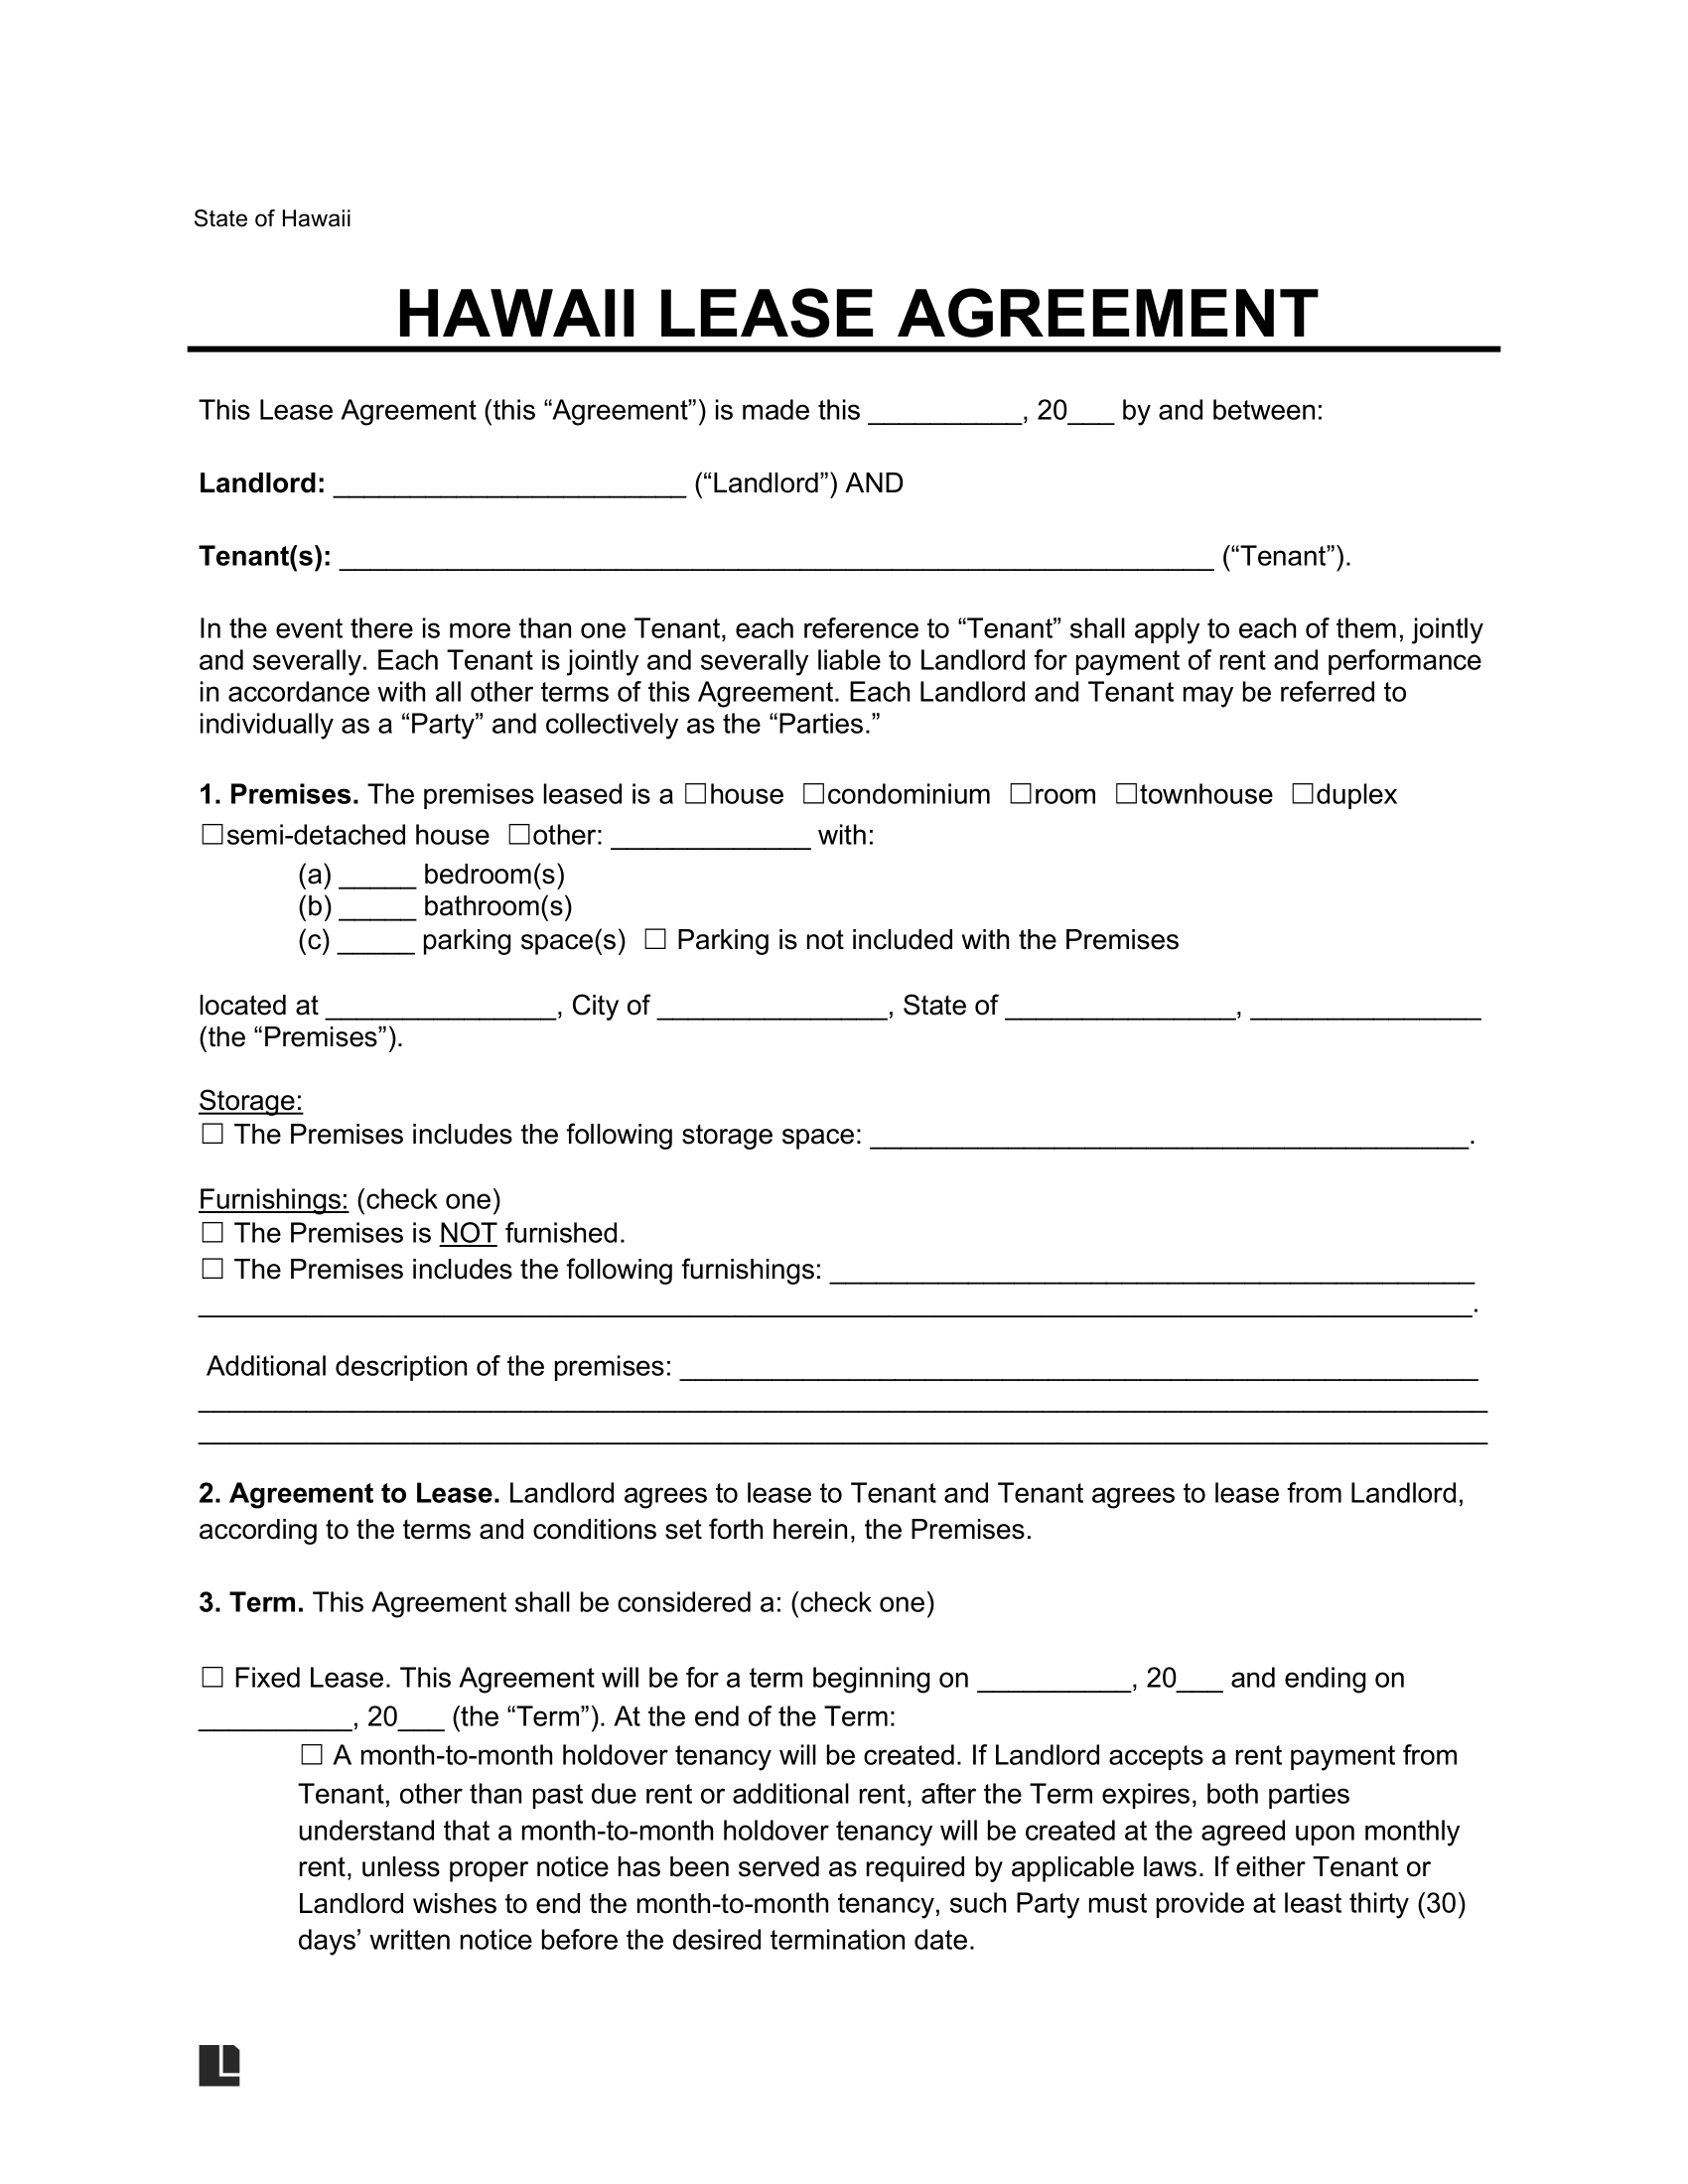 Hawaii Residential Lease Agreement